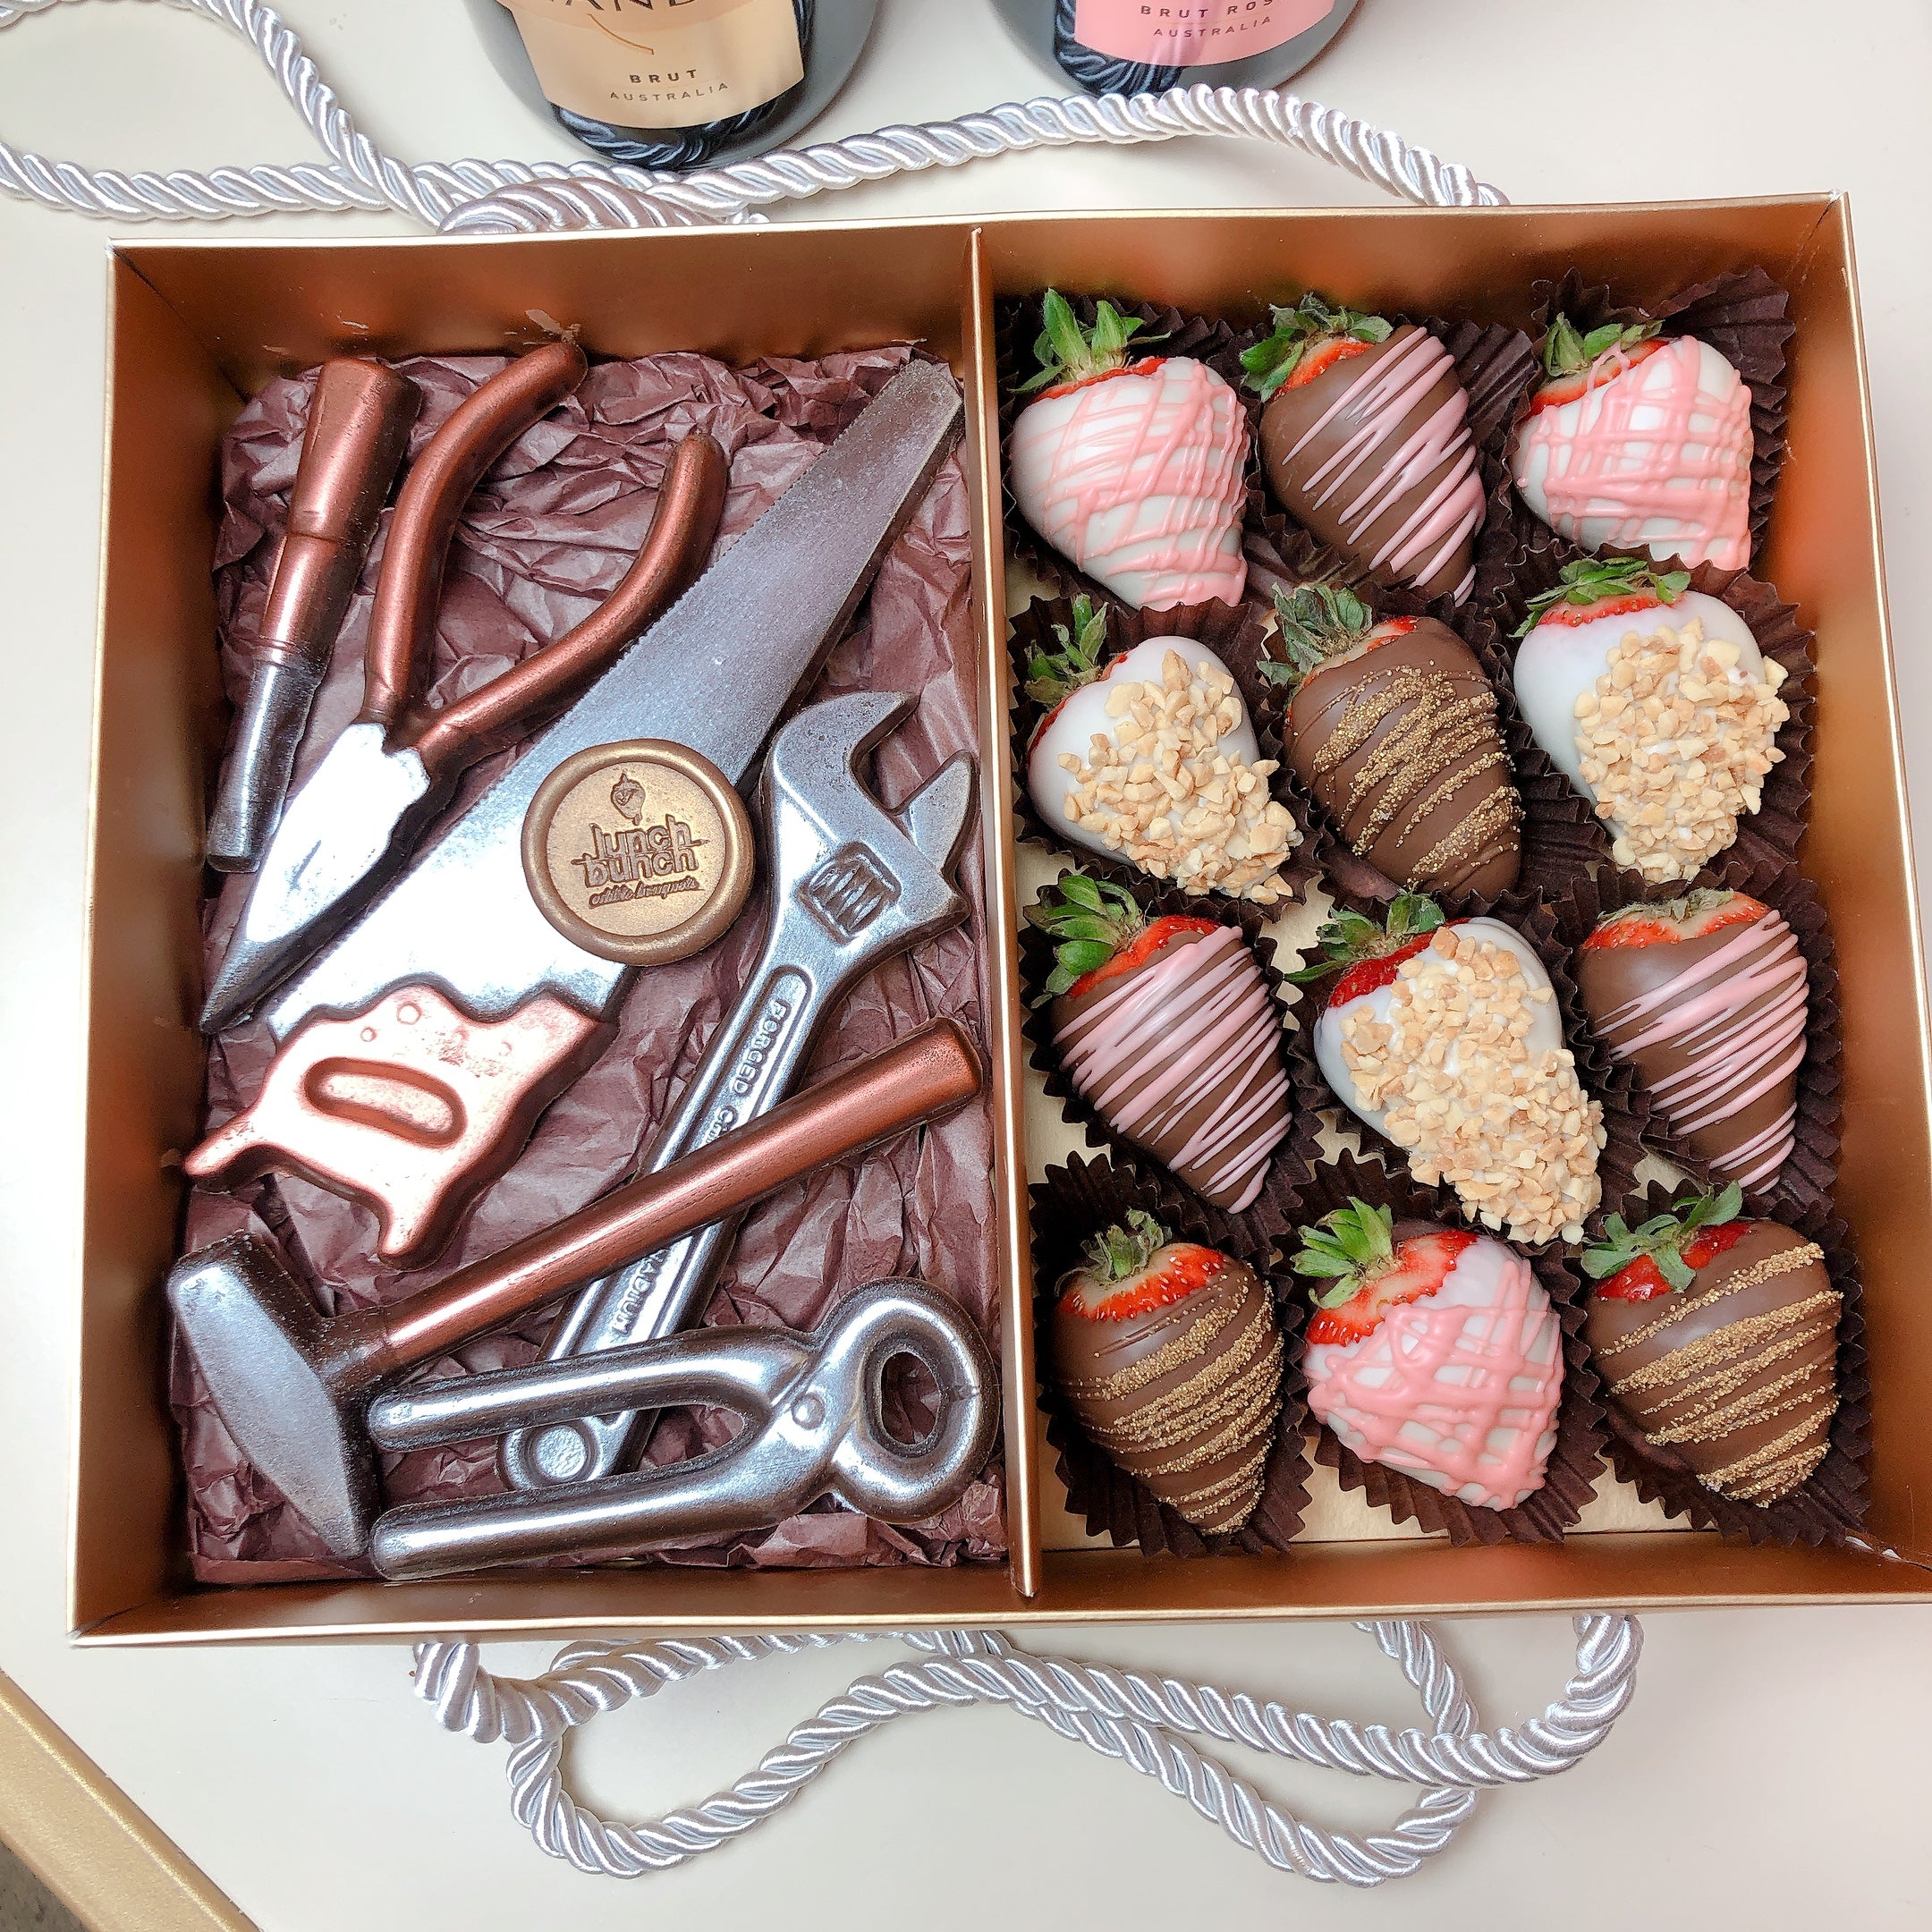 Father's Day gift same day delivery, chocolate tools and strawberries gift box, same day delivery desert boxes